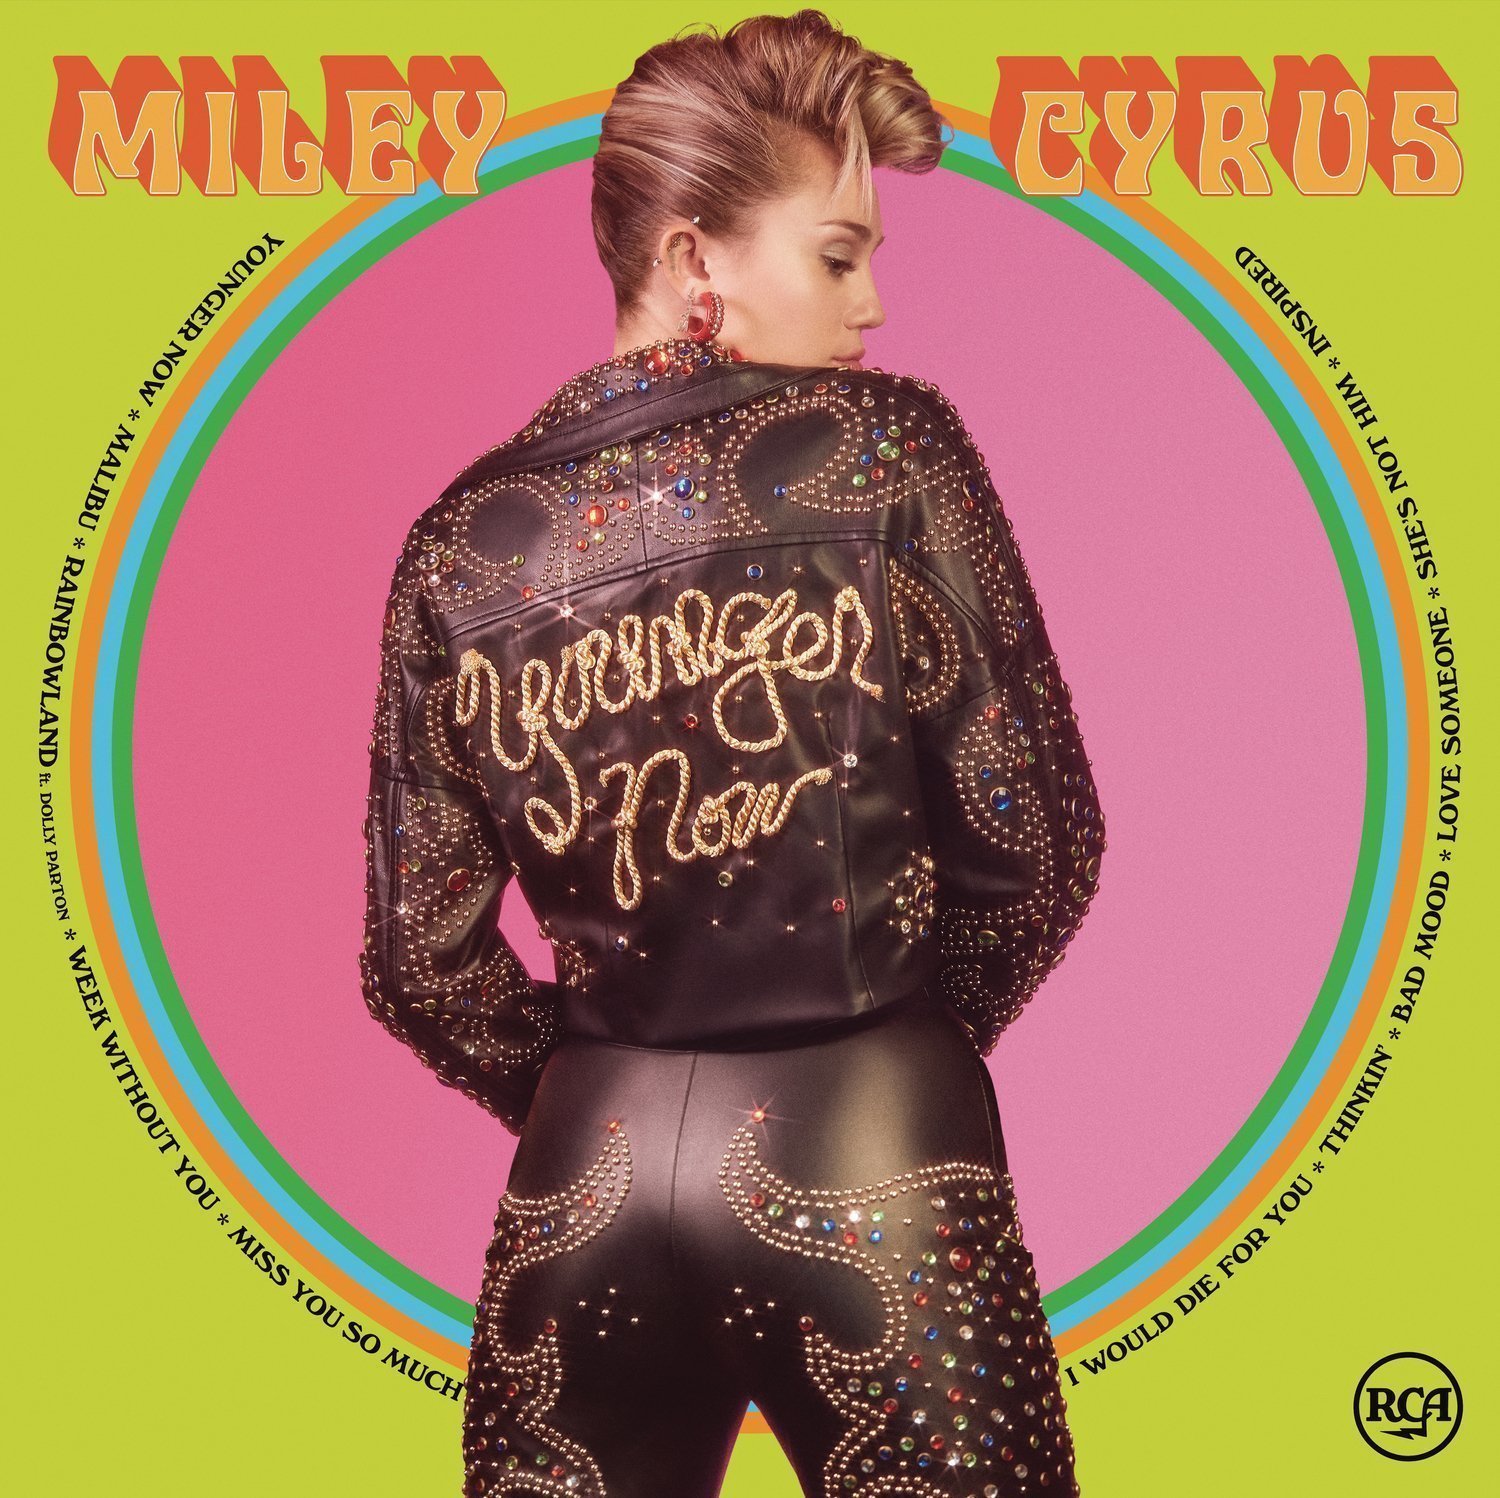 Miley Cyrus Younger Now (LP) Miley Cyrus